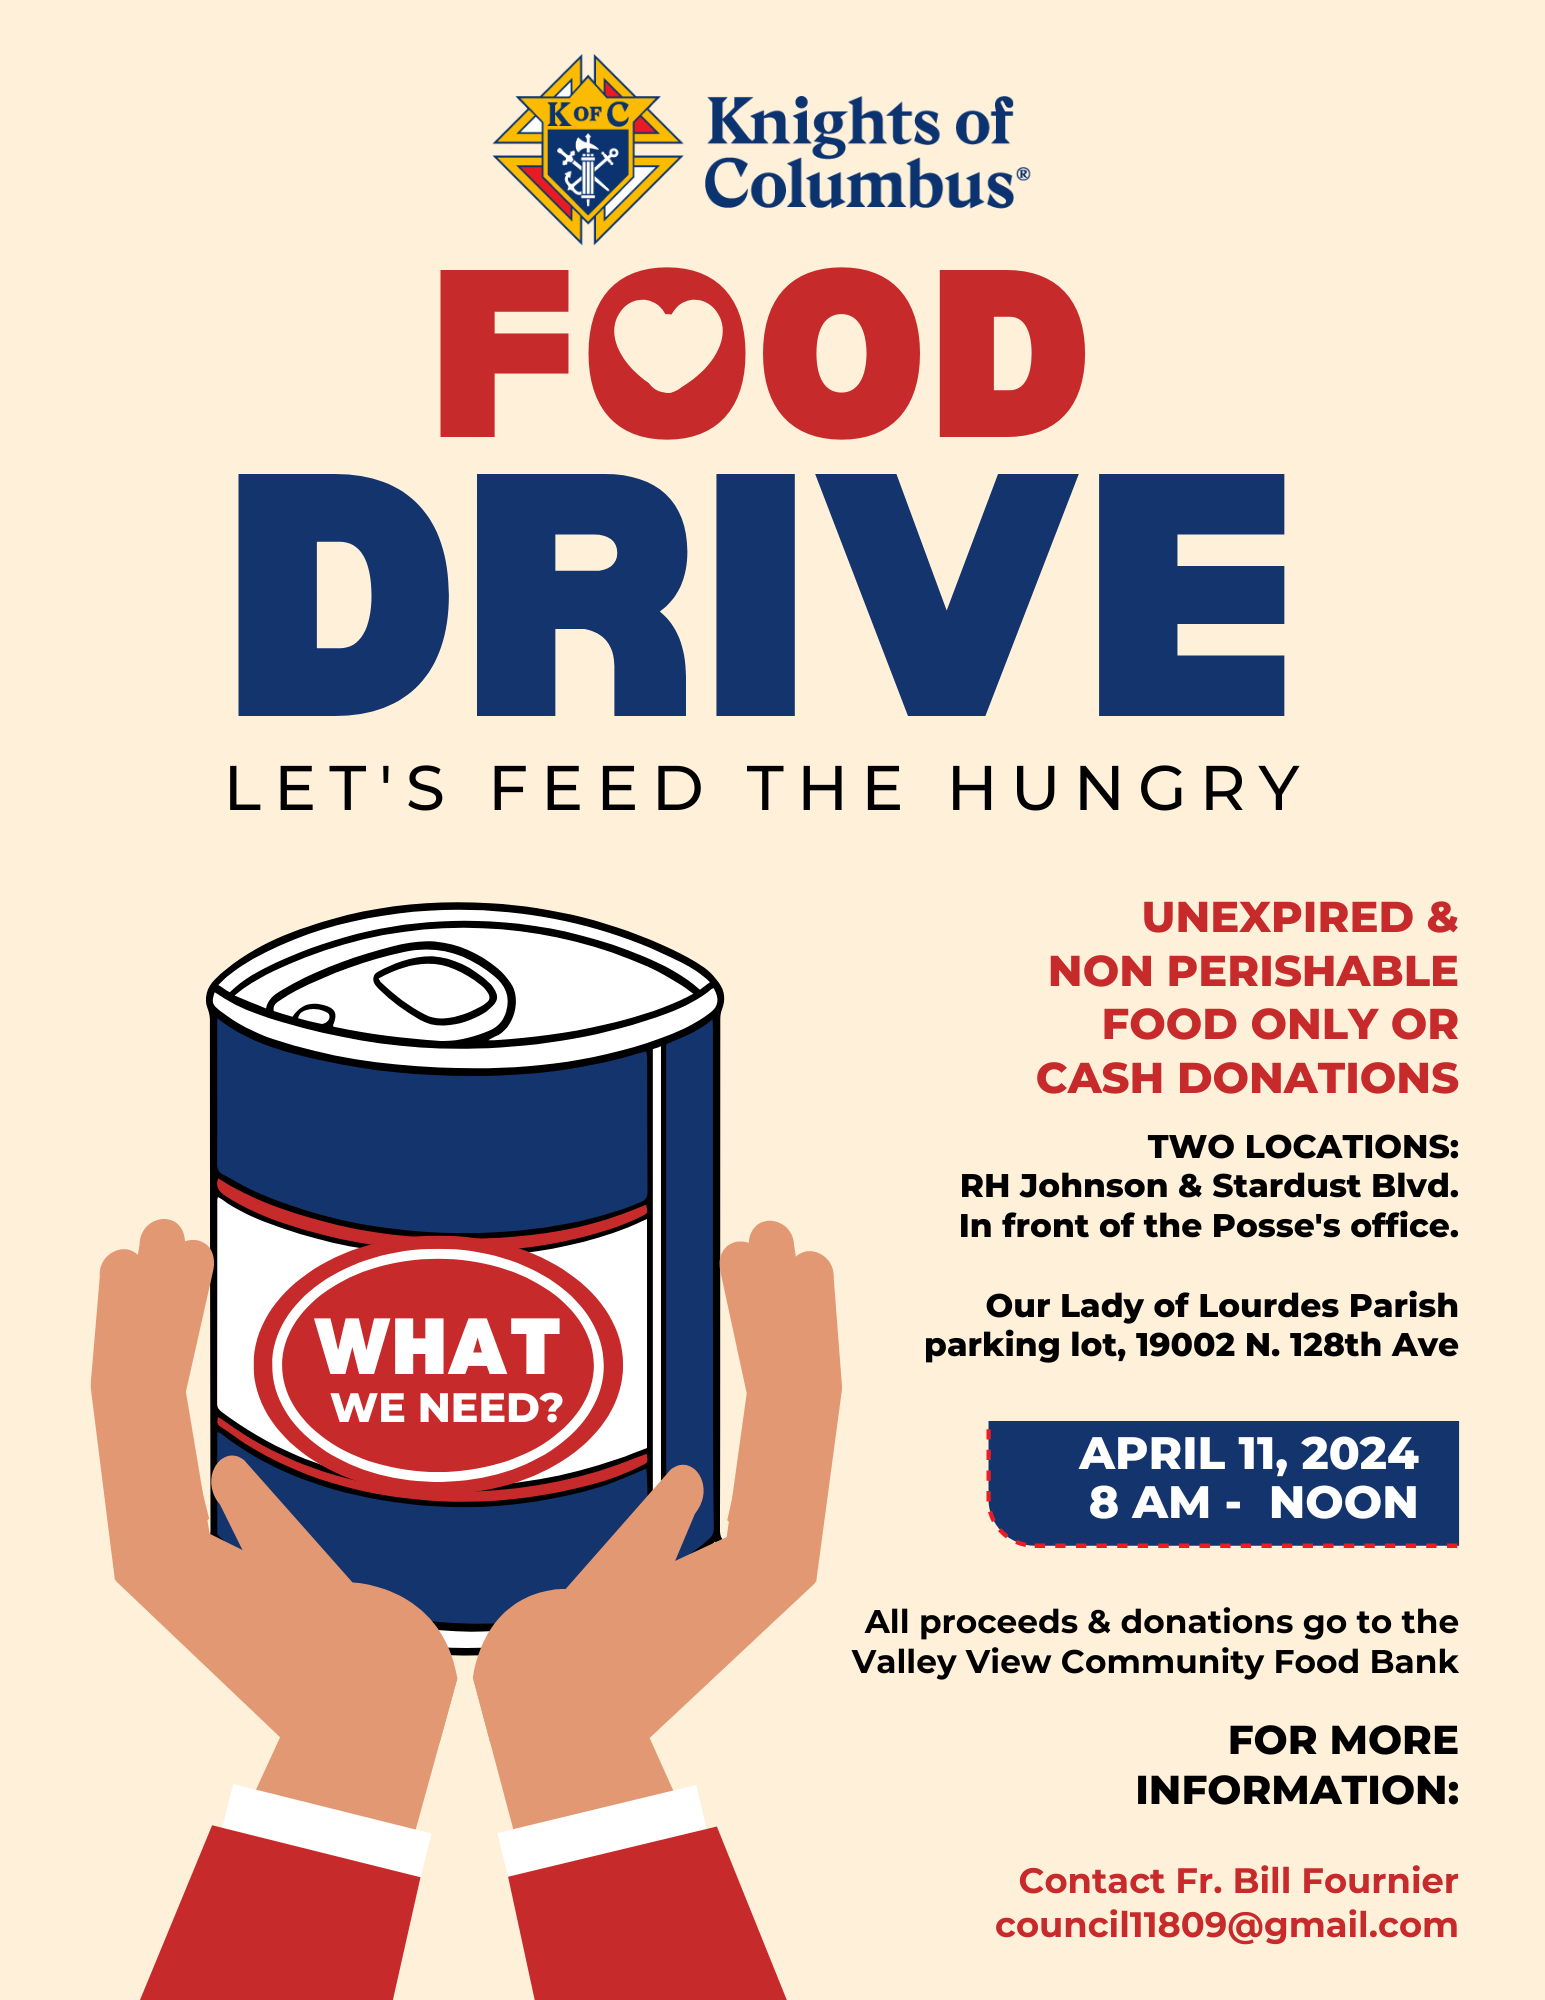 K of C 11809 Spring Food Drive, April 11, 2024 from 8 AM to 12 Noon.